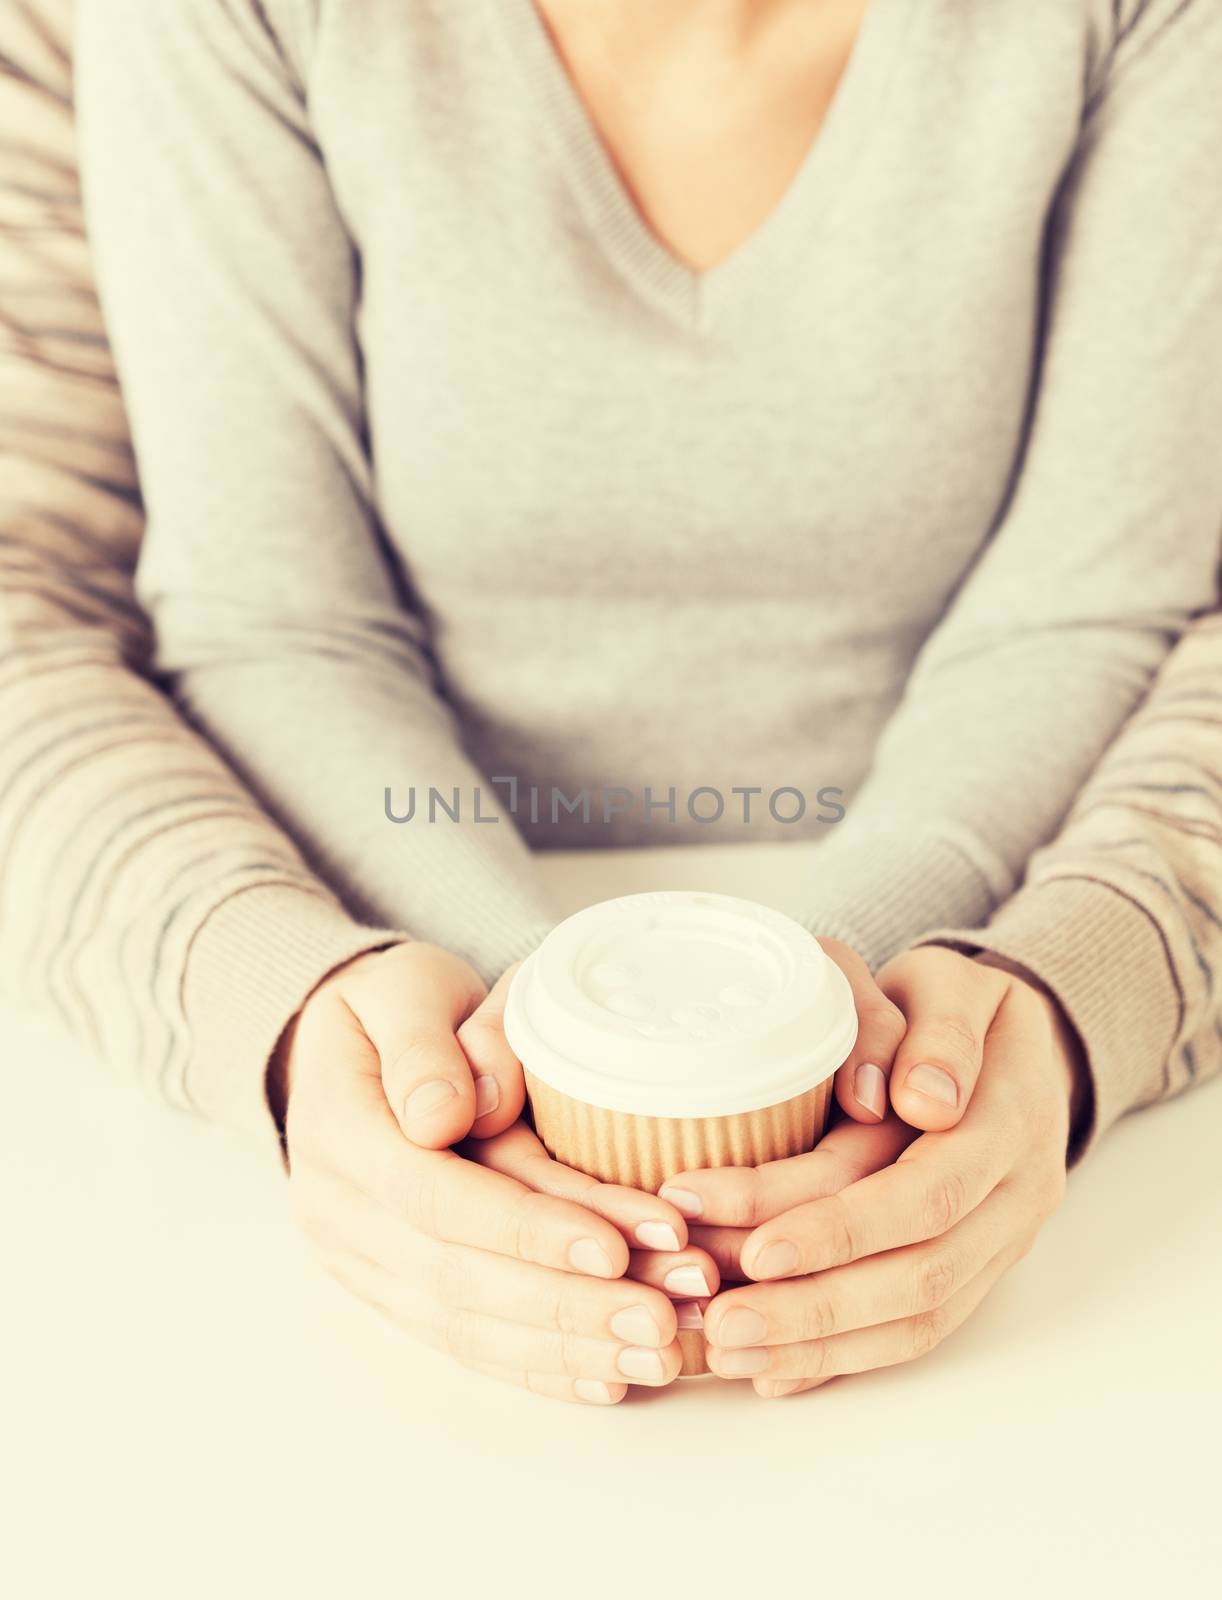 woman and man hands holding take away coffee cup